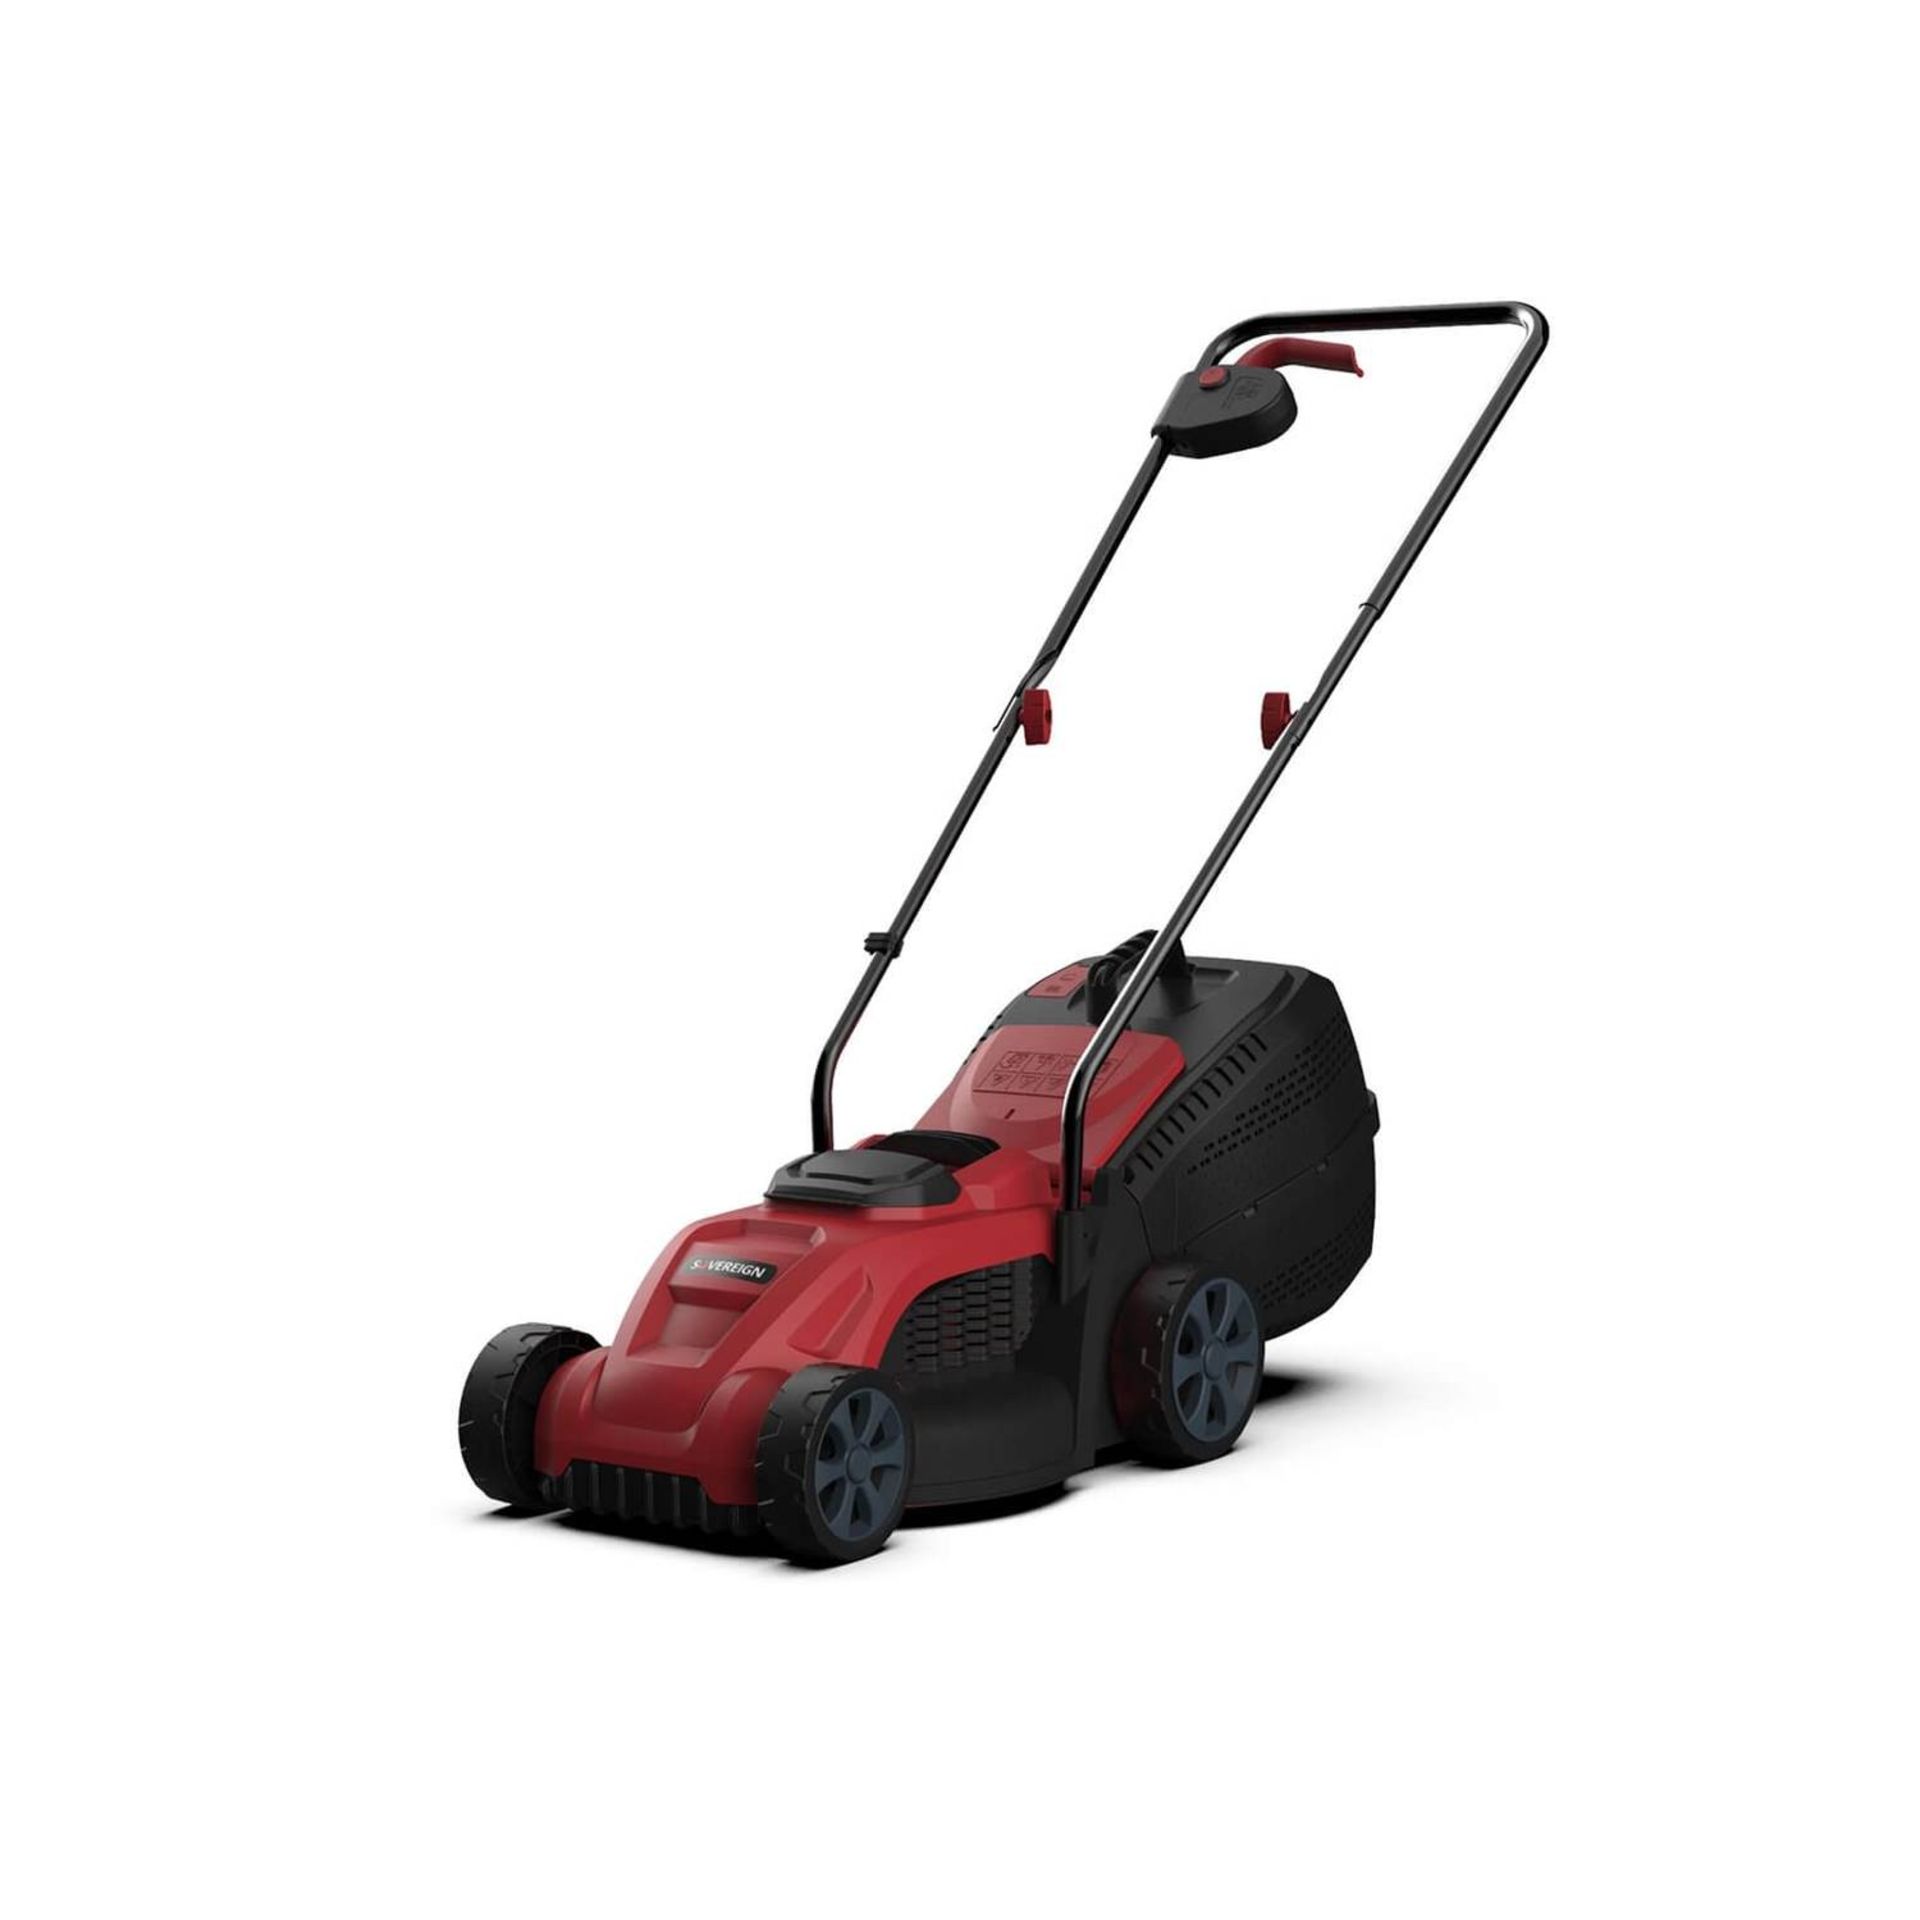 (R11A) 1x Sovereign 18V Cordless Lawn Mower (With Battery & Charger). RRP £89.